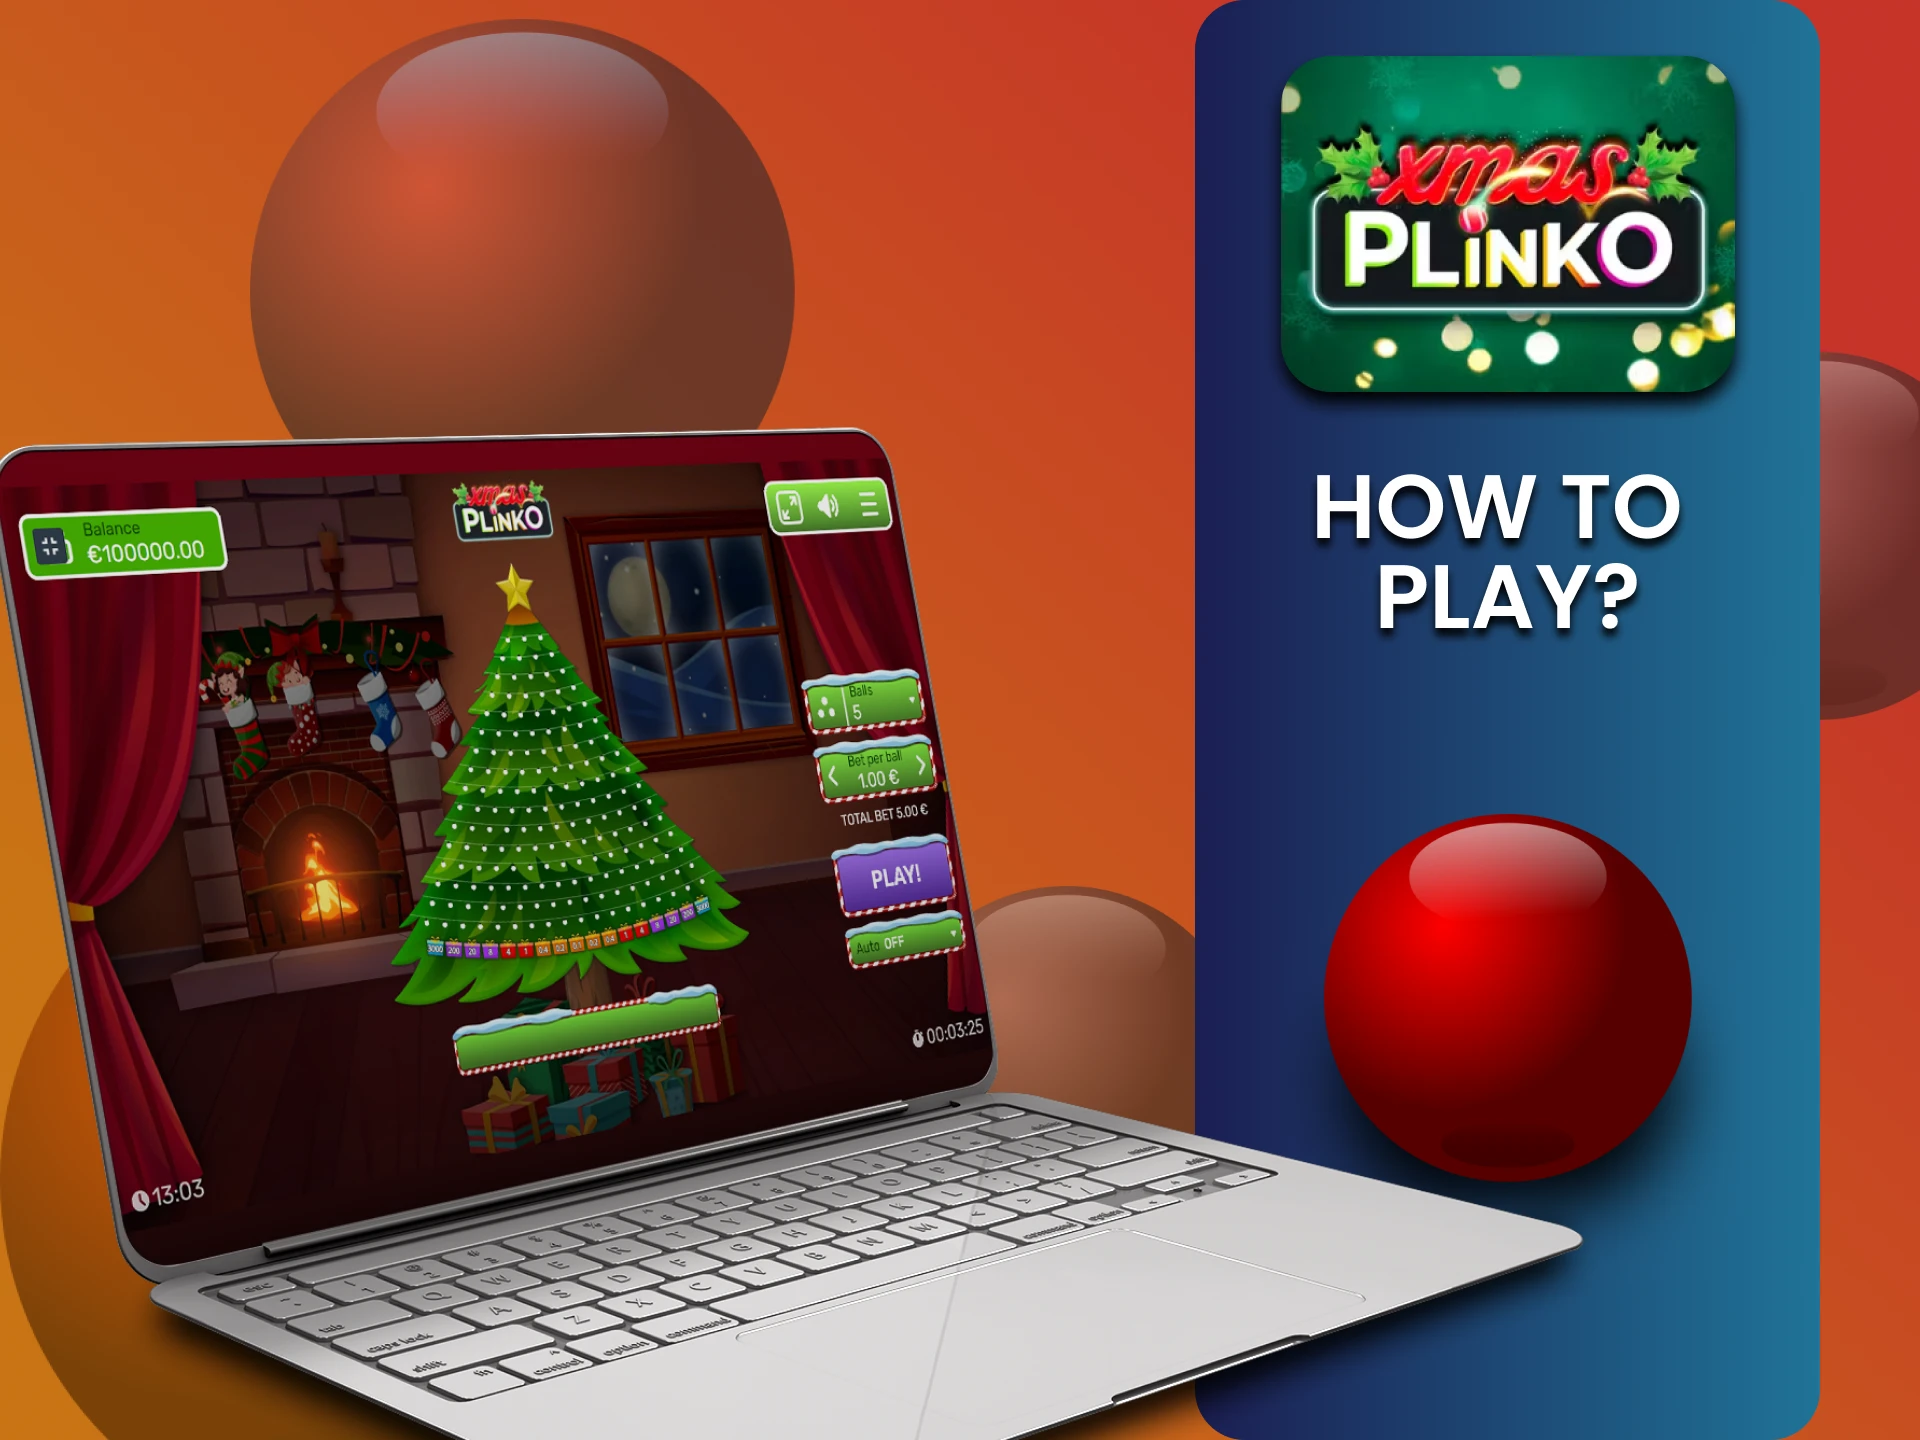 We will tell you how to start playing Plinko Xmas.